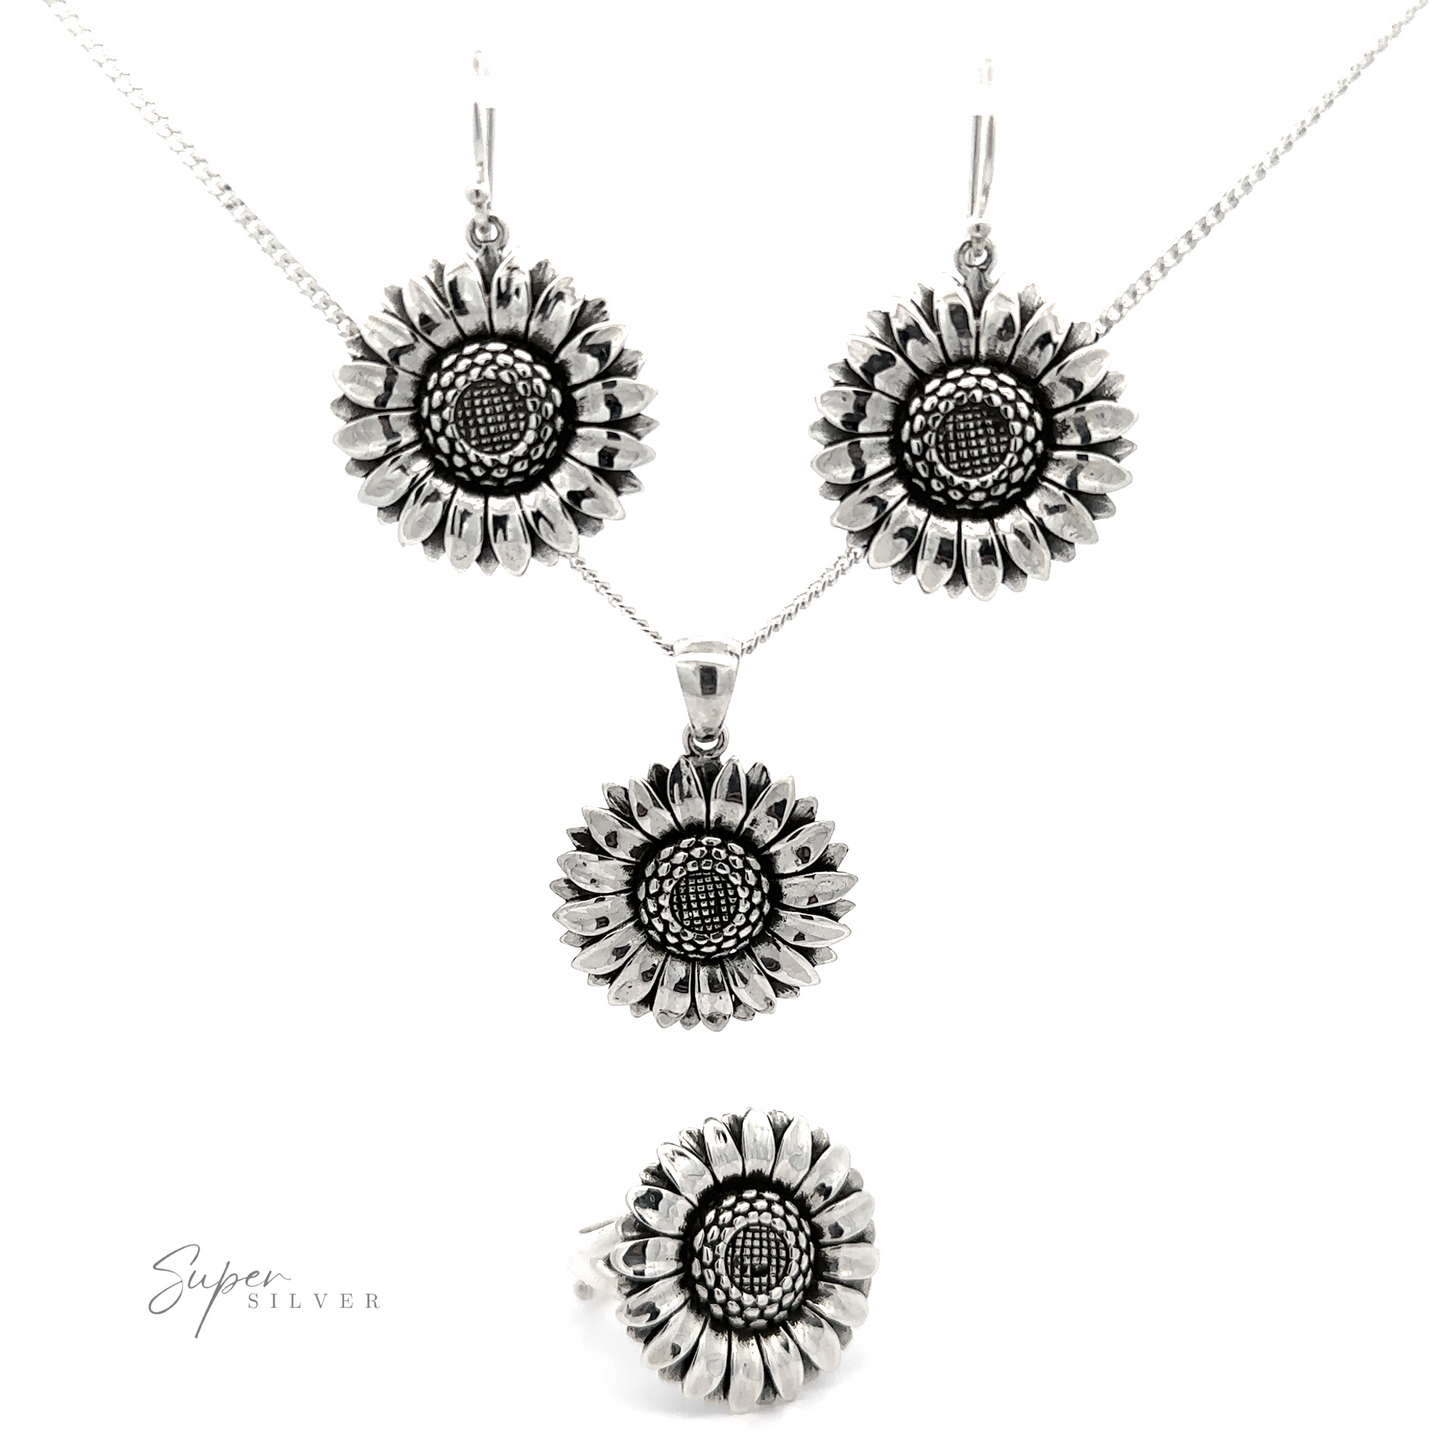 A Silver Sunflower Earrings set featuring sunflower designs, including two earrings, a necklace, and a ring, displayed against a white background with a logo reading "super silver.